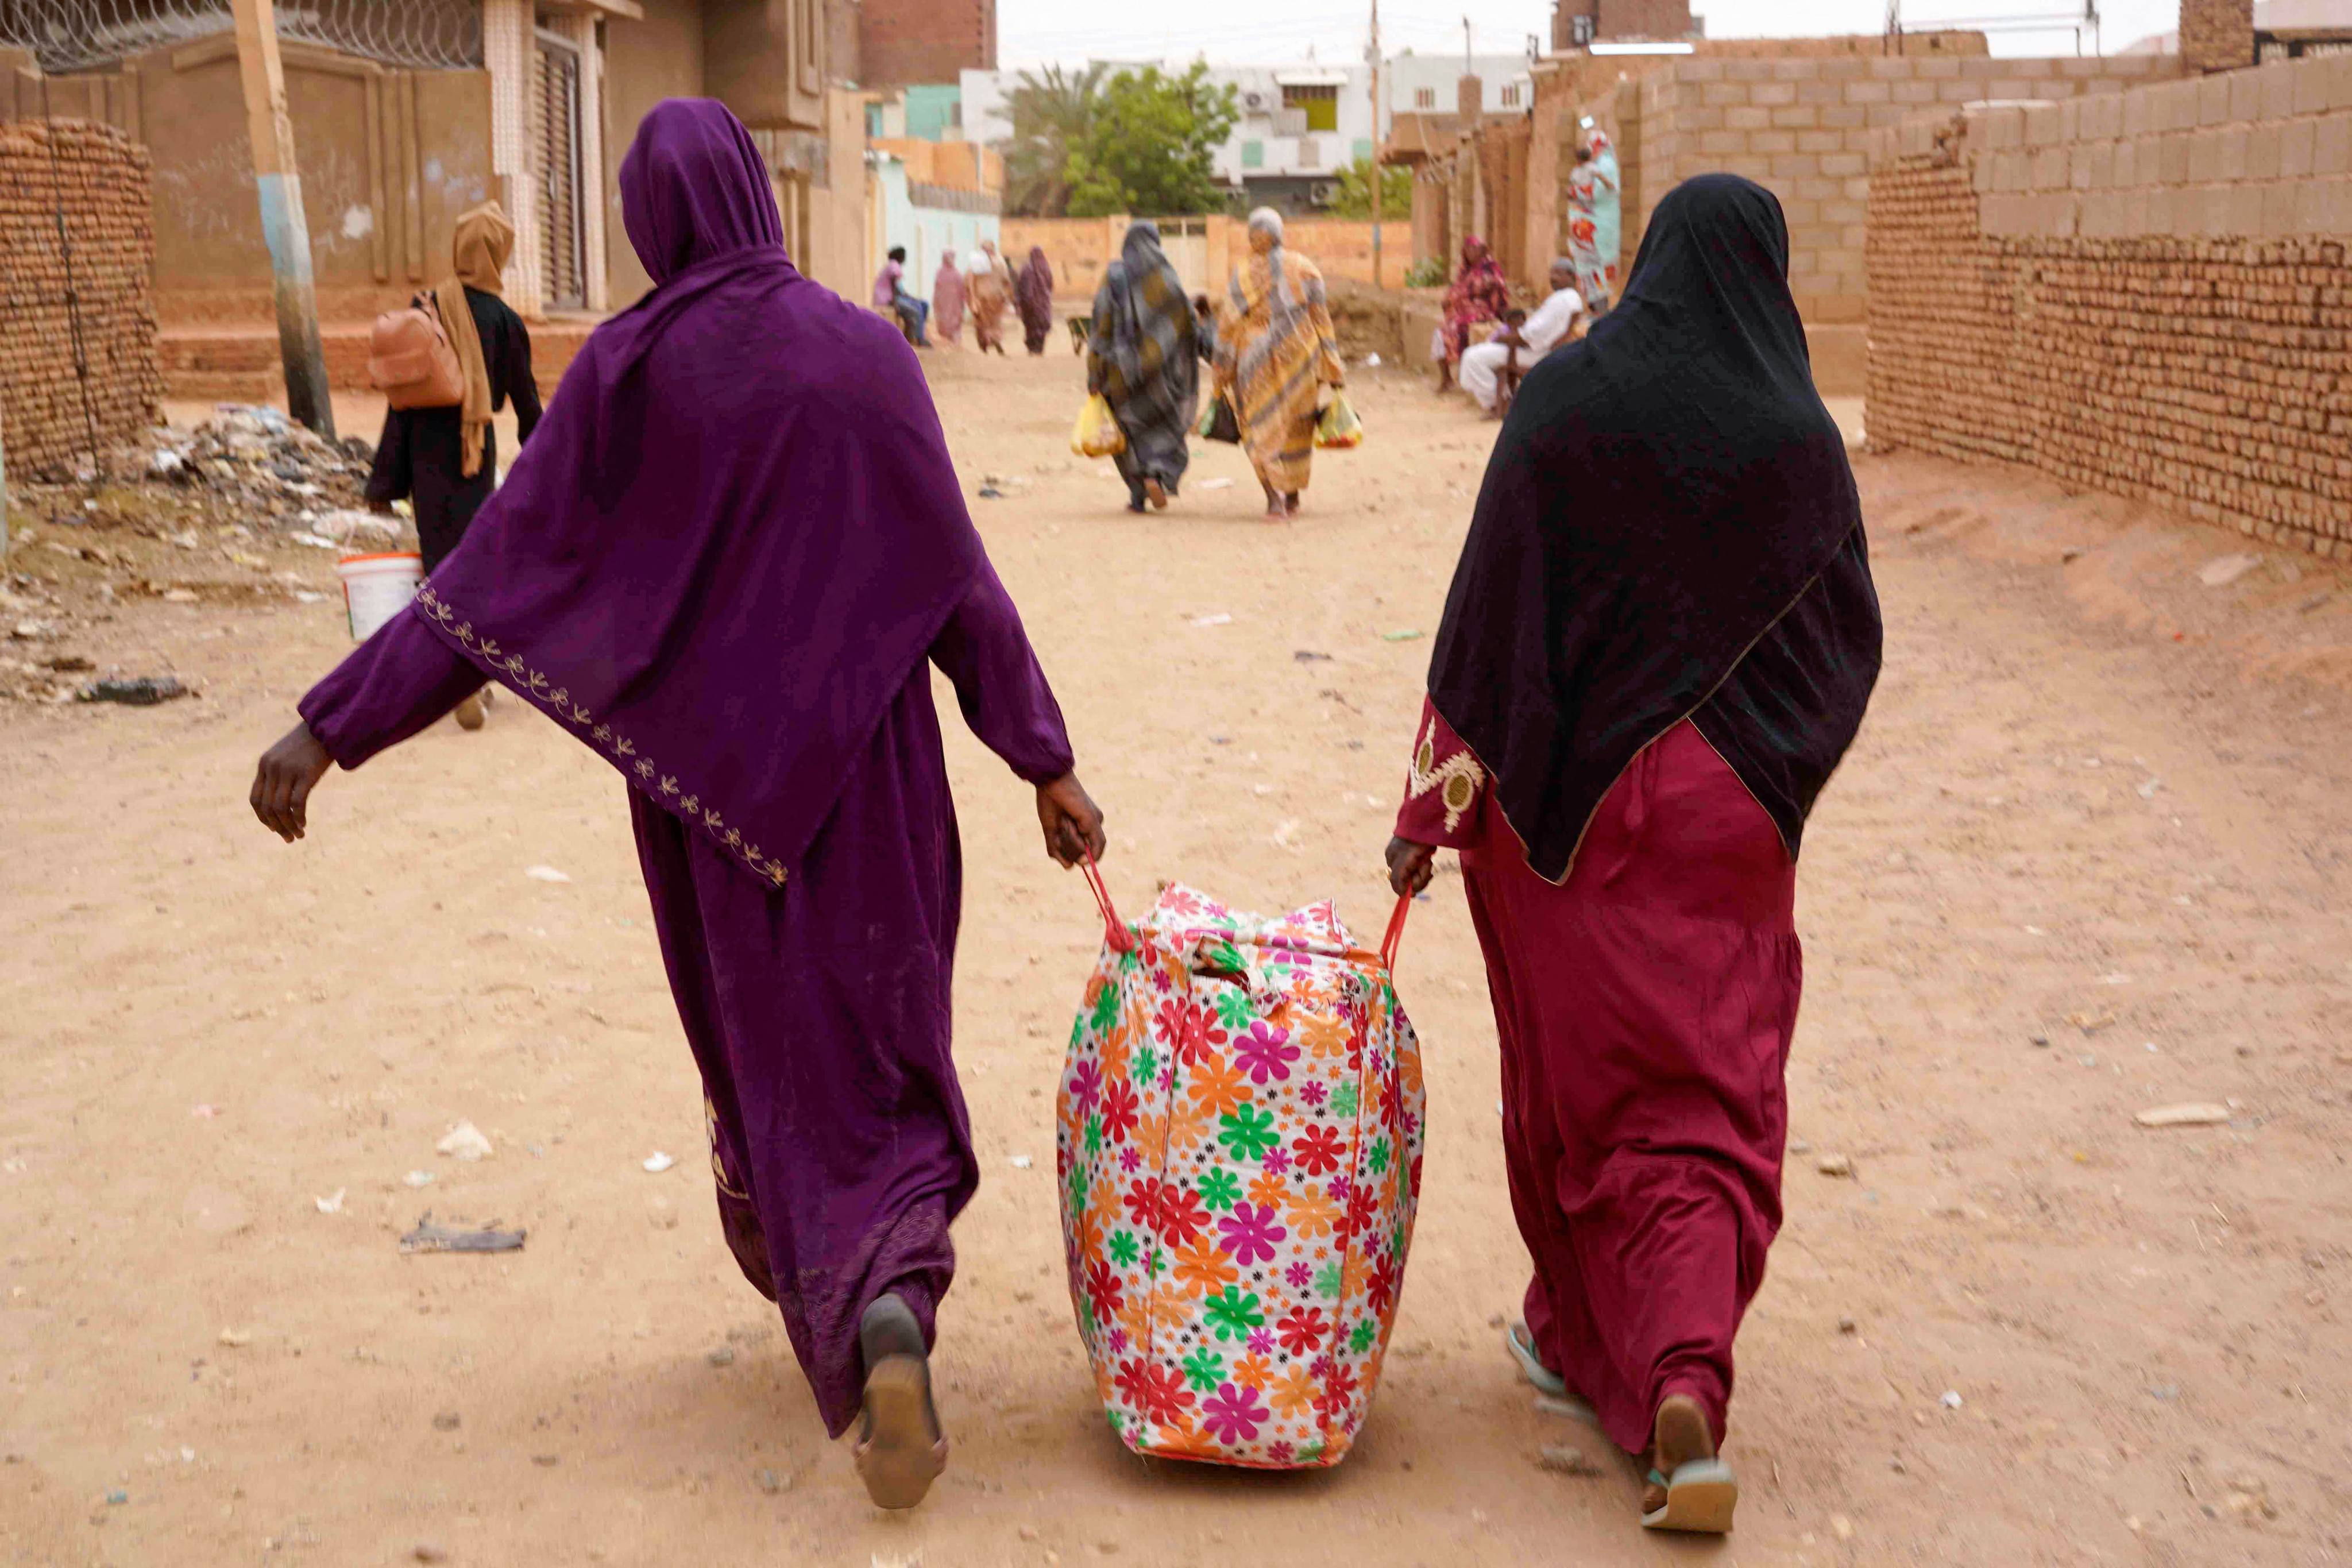 Women carrying belongings walk down a street in Omdurman, a city in war-torn Sudan, on Monday, the day a one-week ceasefire aiming to allow humanitarian aid for civilians is due to expire. Photo: AFP